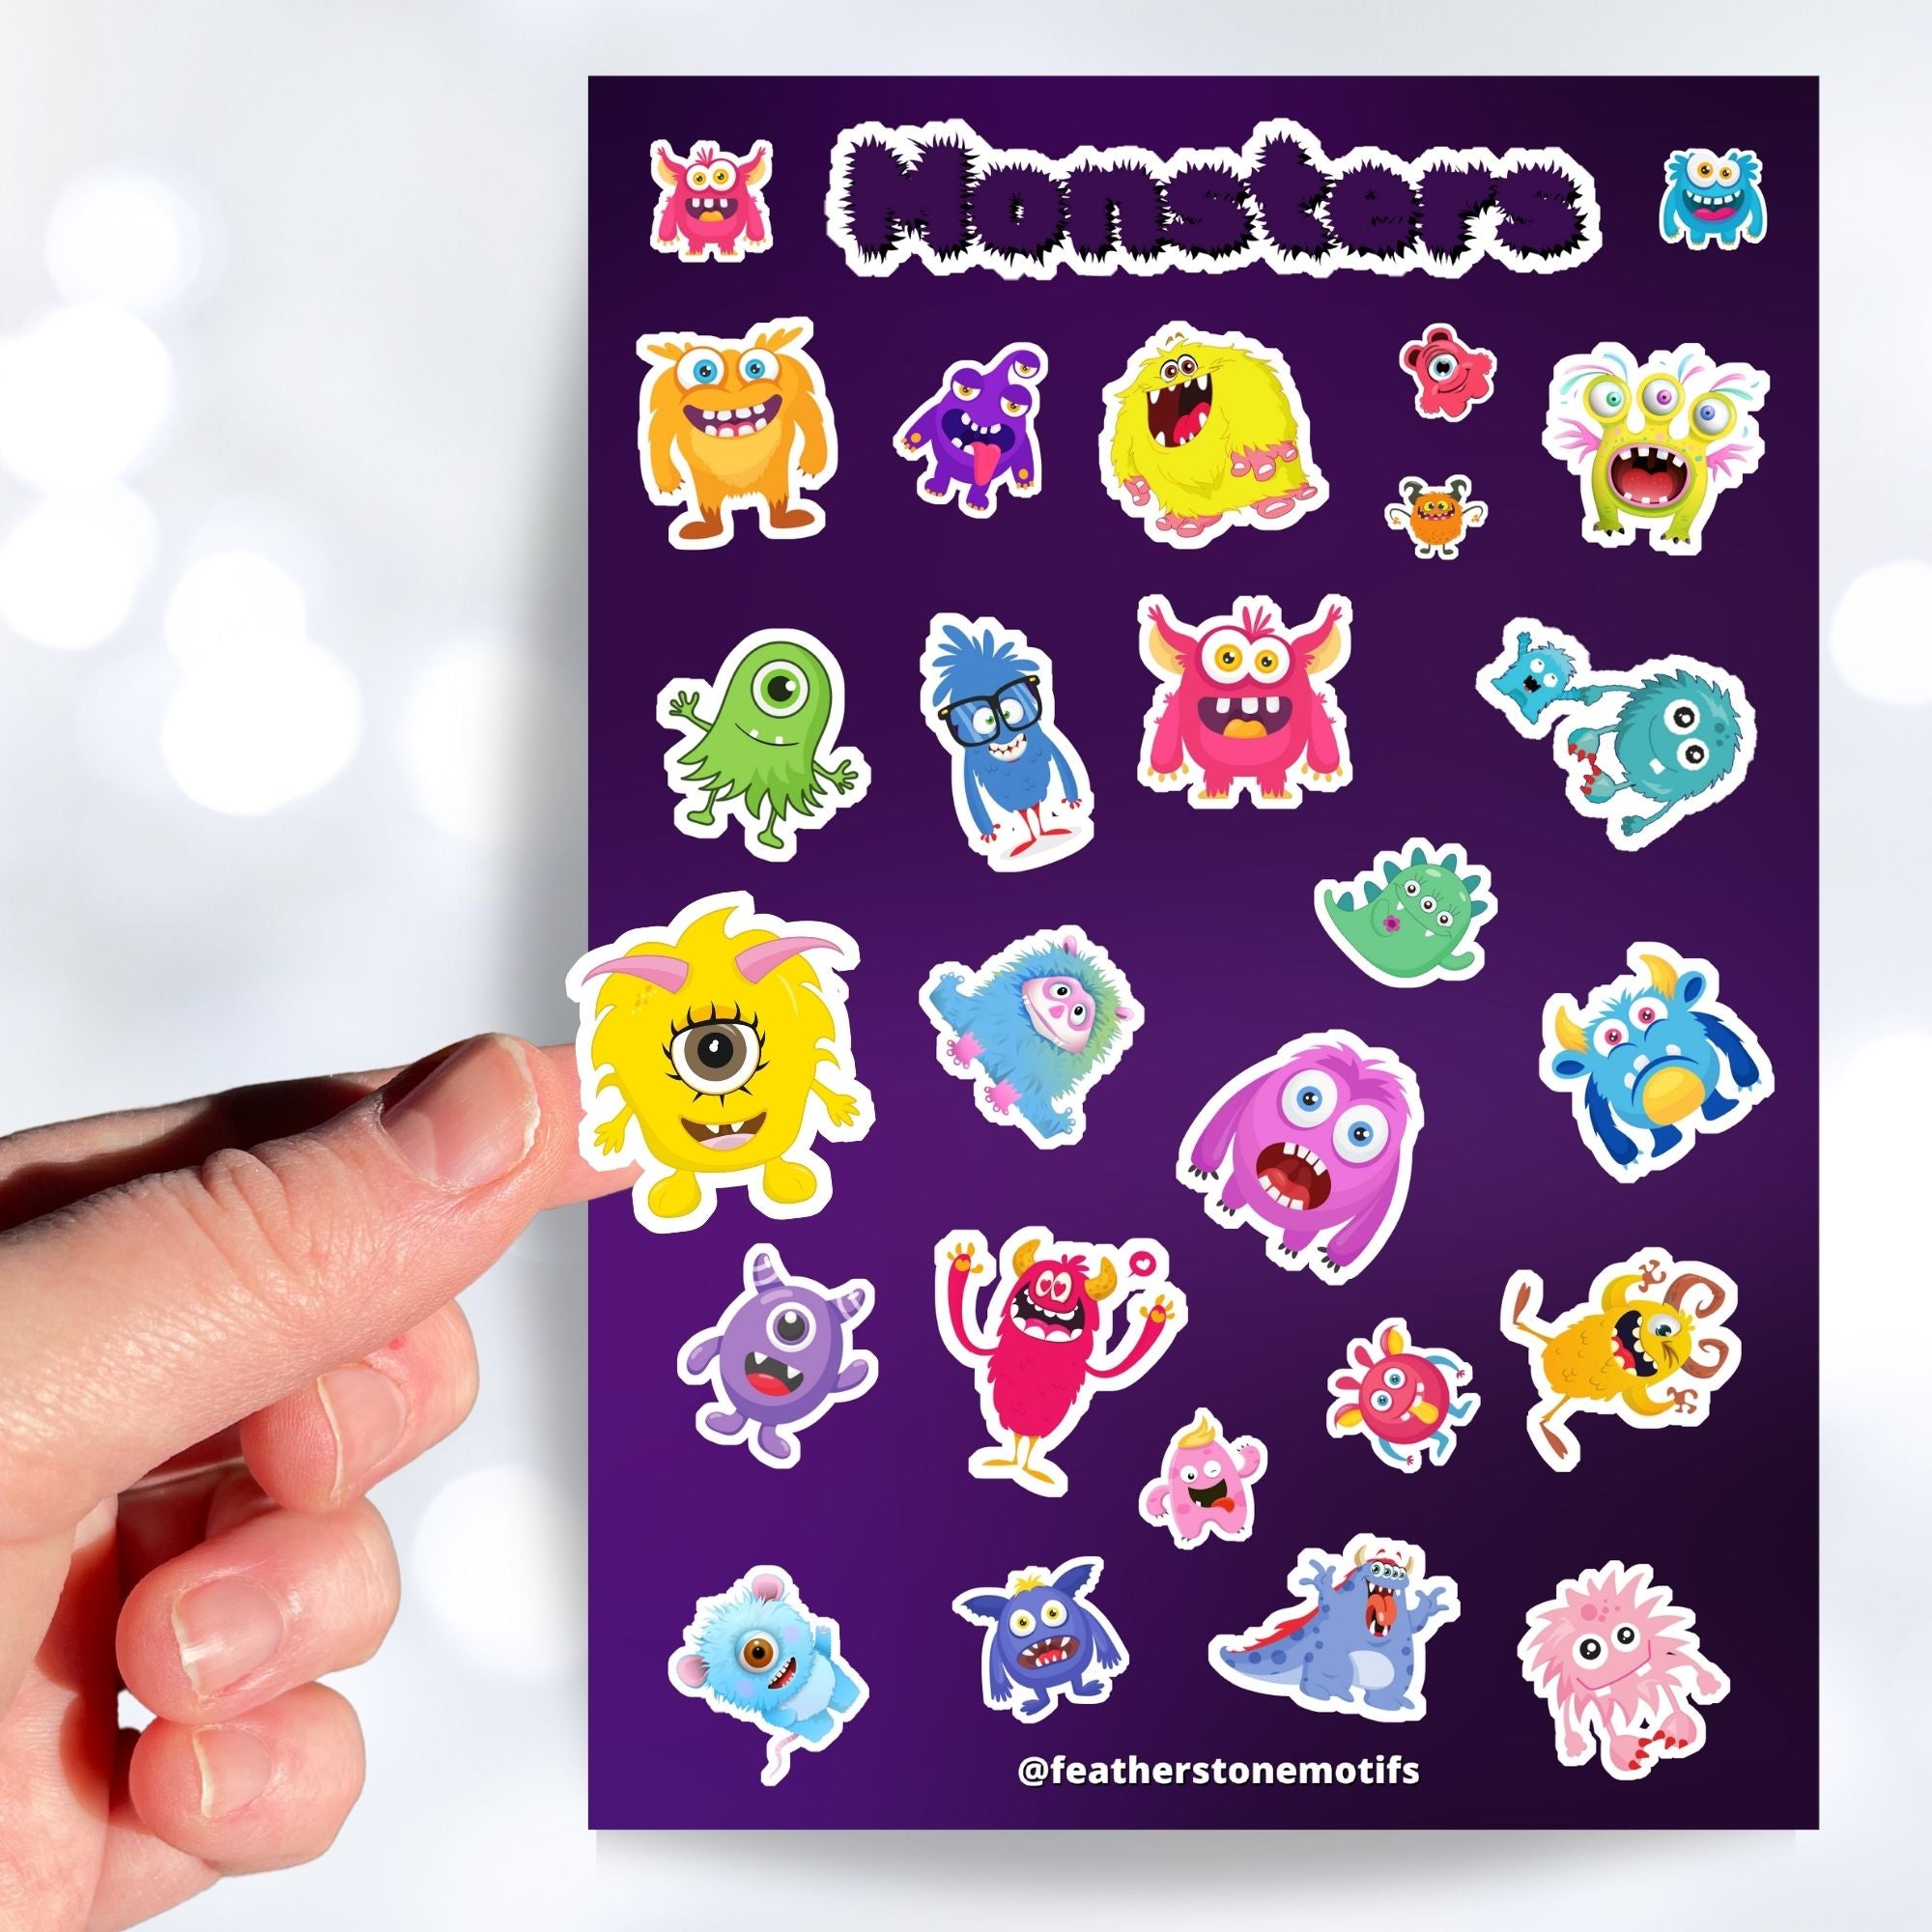 Don't look under the bed! No - these monster's aren't scary! This sticker sheet is filled with sticker images of cute and fun monsters that kids aged 1 to 100 will enjoy. This image shows a hand holding a yellow one eyed monster sticker above the sticker sheet.